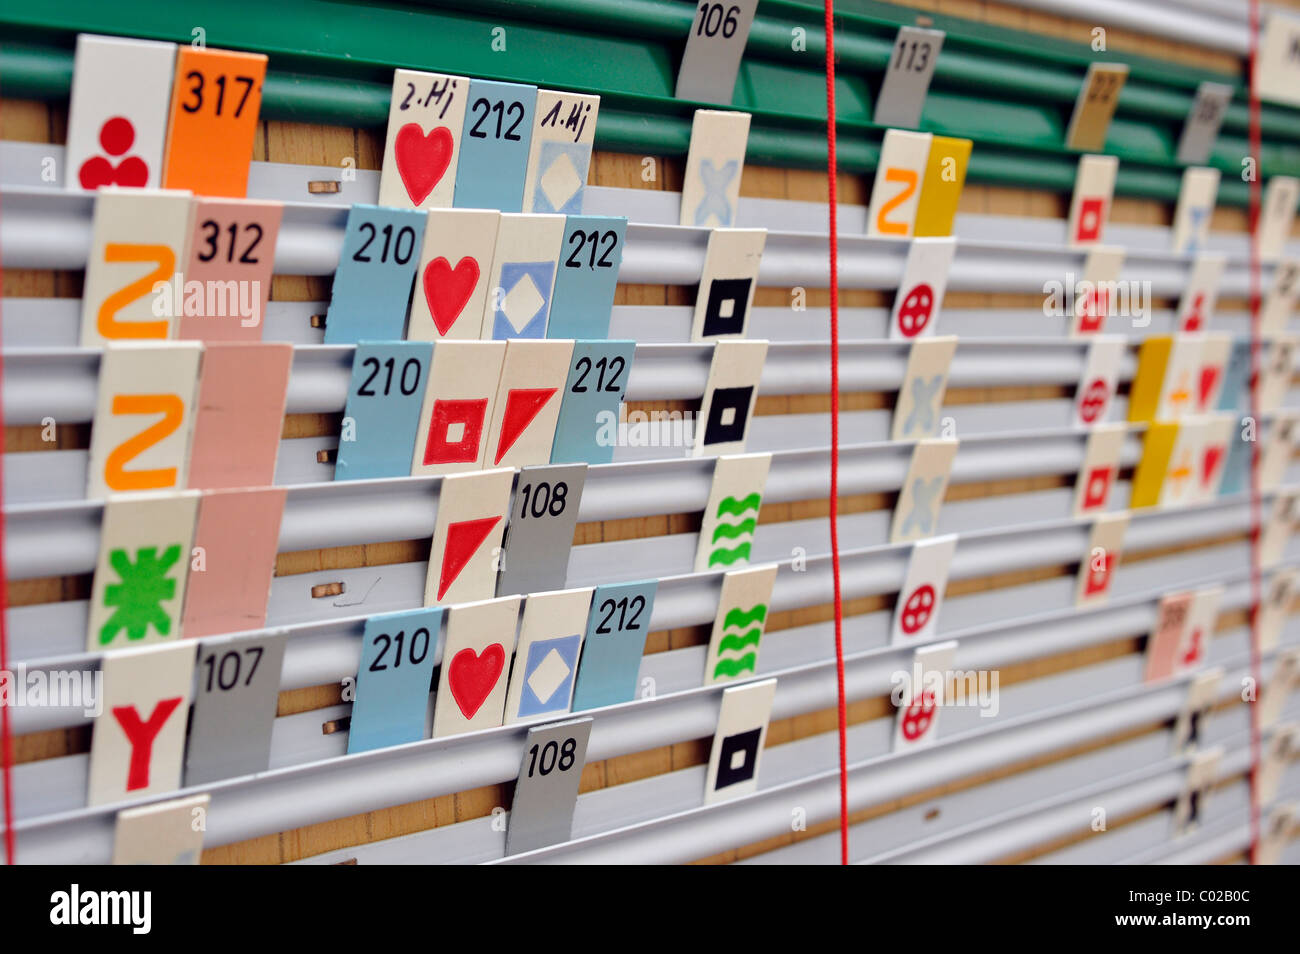 Traditional scheduling board for timetable, manpower planning Stock Photo